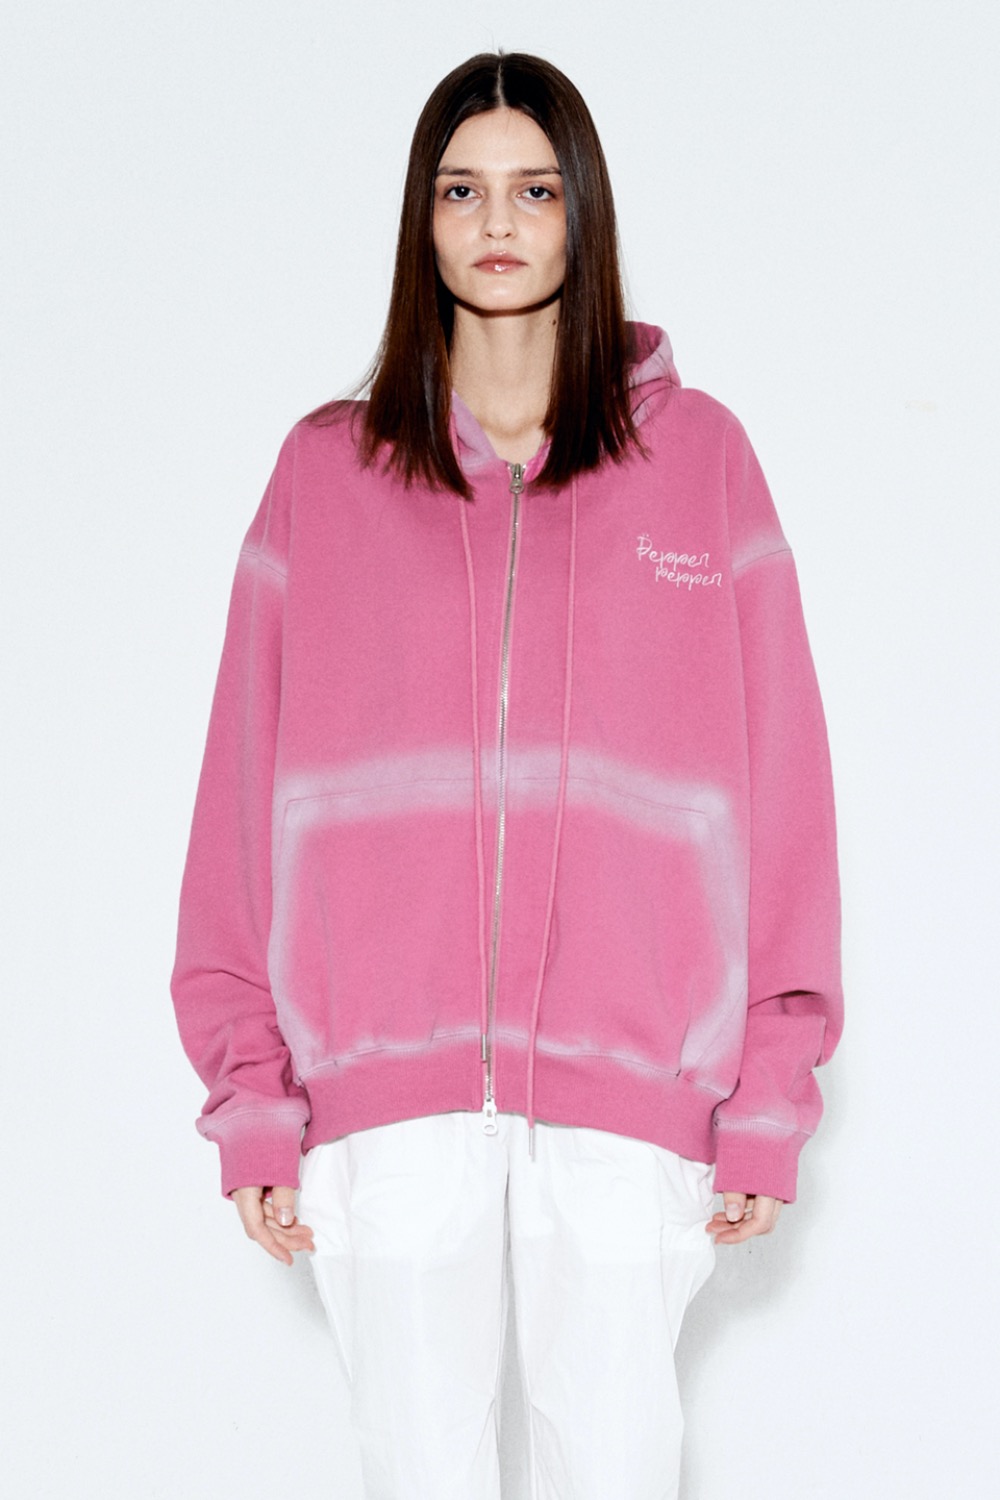 Pepper unisex point painting zip-up [Pink]